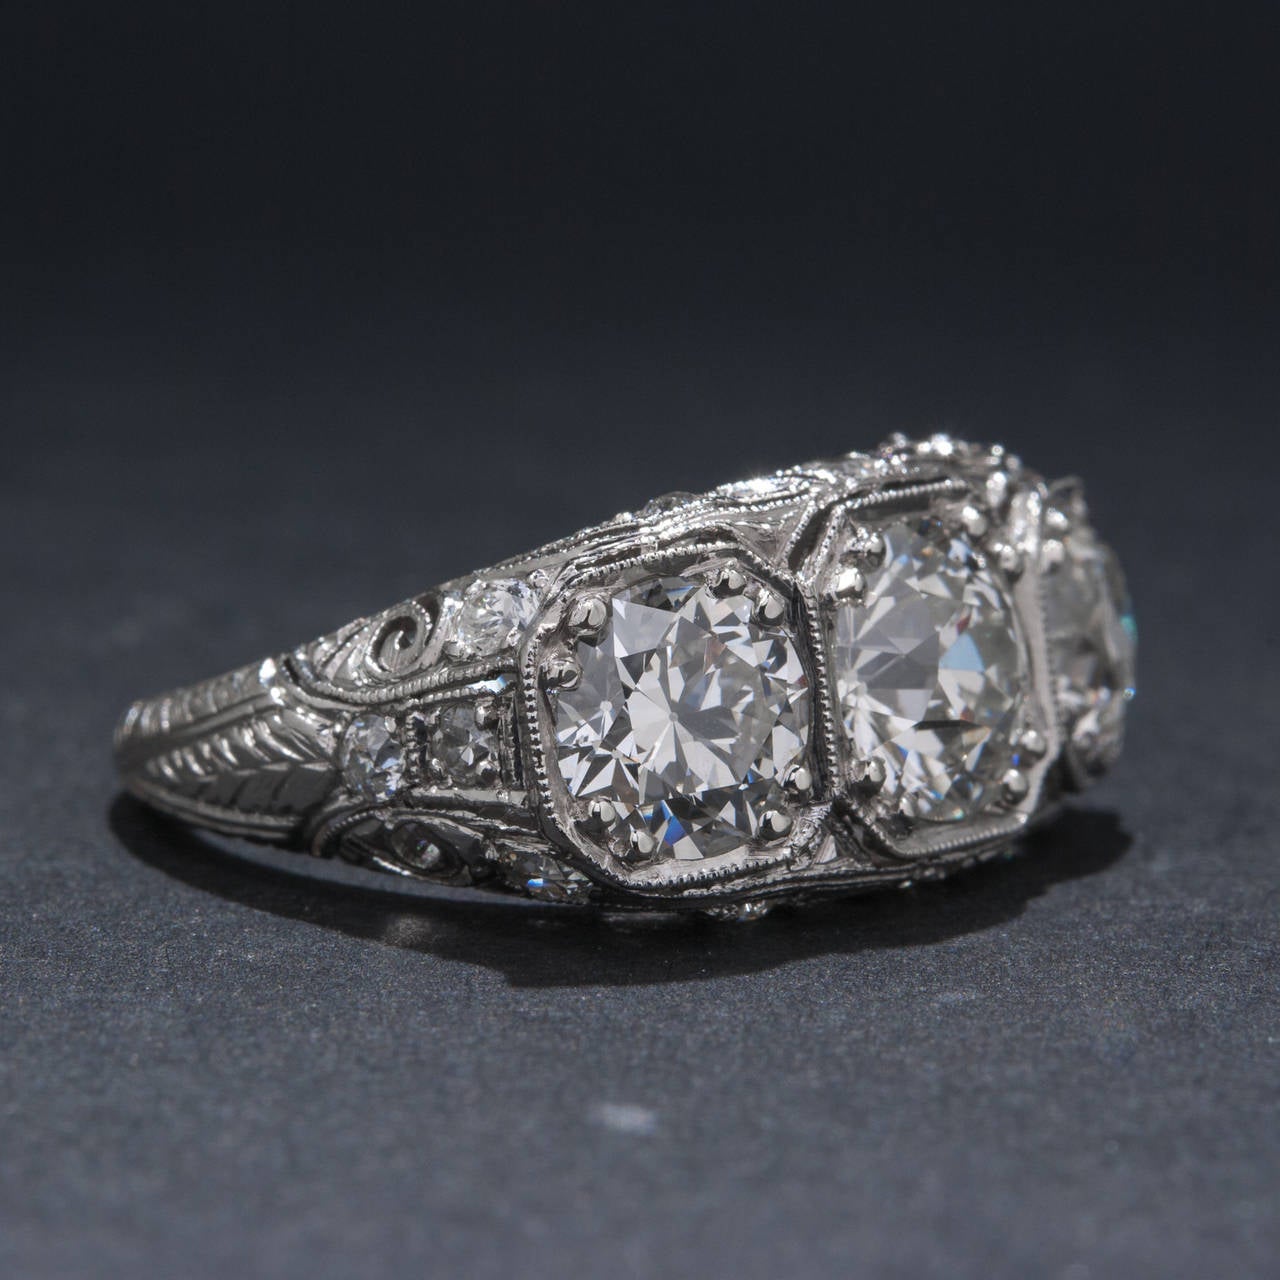 An exceptional Art Deco diamond ring featuring a 1.46 carat center diamond and 2 side diamonds weighing 1.99 carats in total. The diamonds are of  